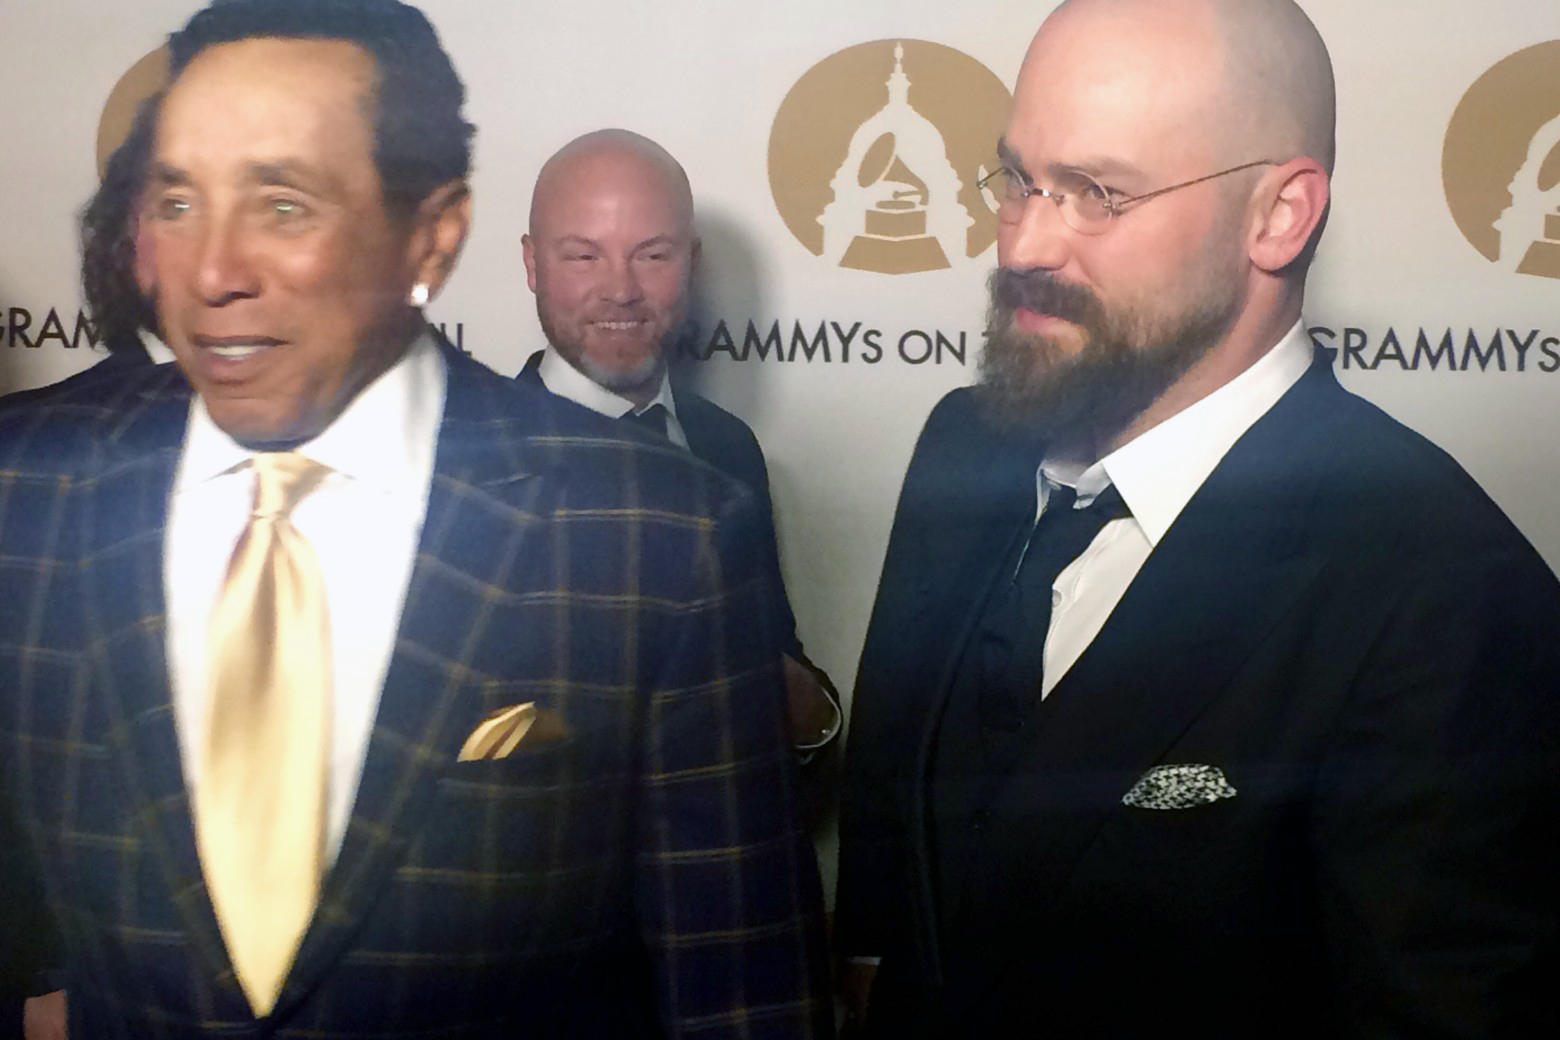 Smokey Robinson and Zac Brown attend the 2016 Grammys on the Hill event at The Hamilton in Washington D.C. (WTOP/Jason Fraley)